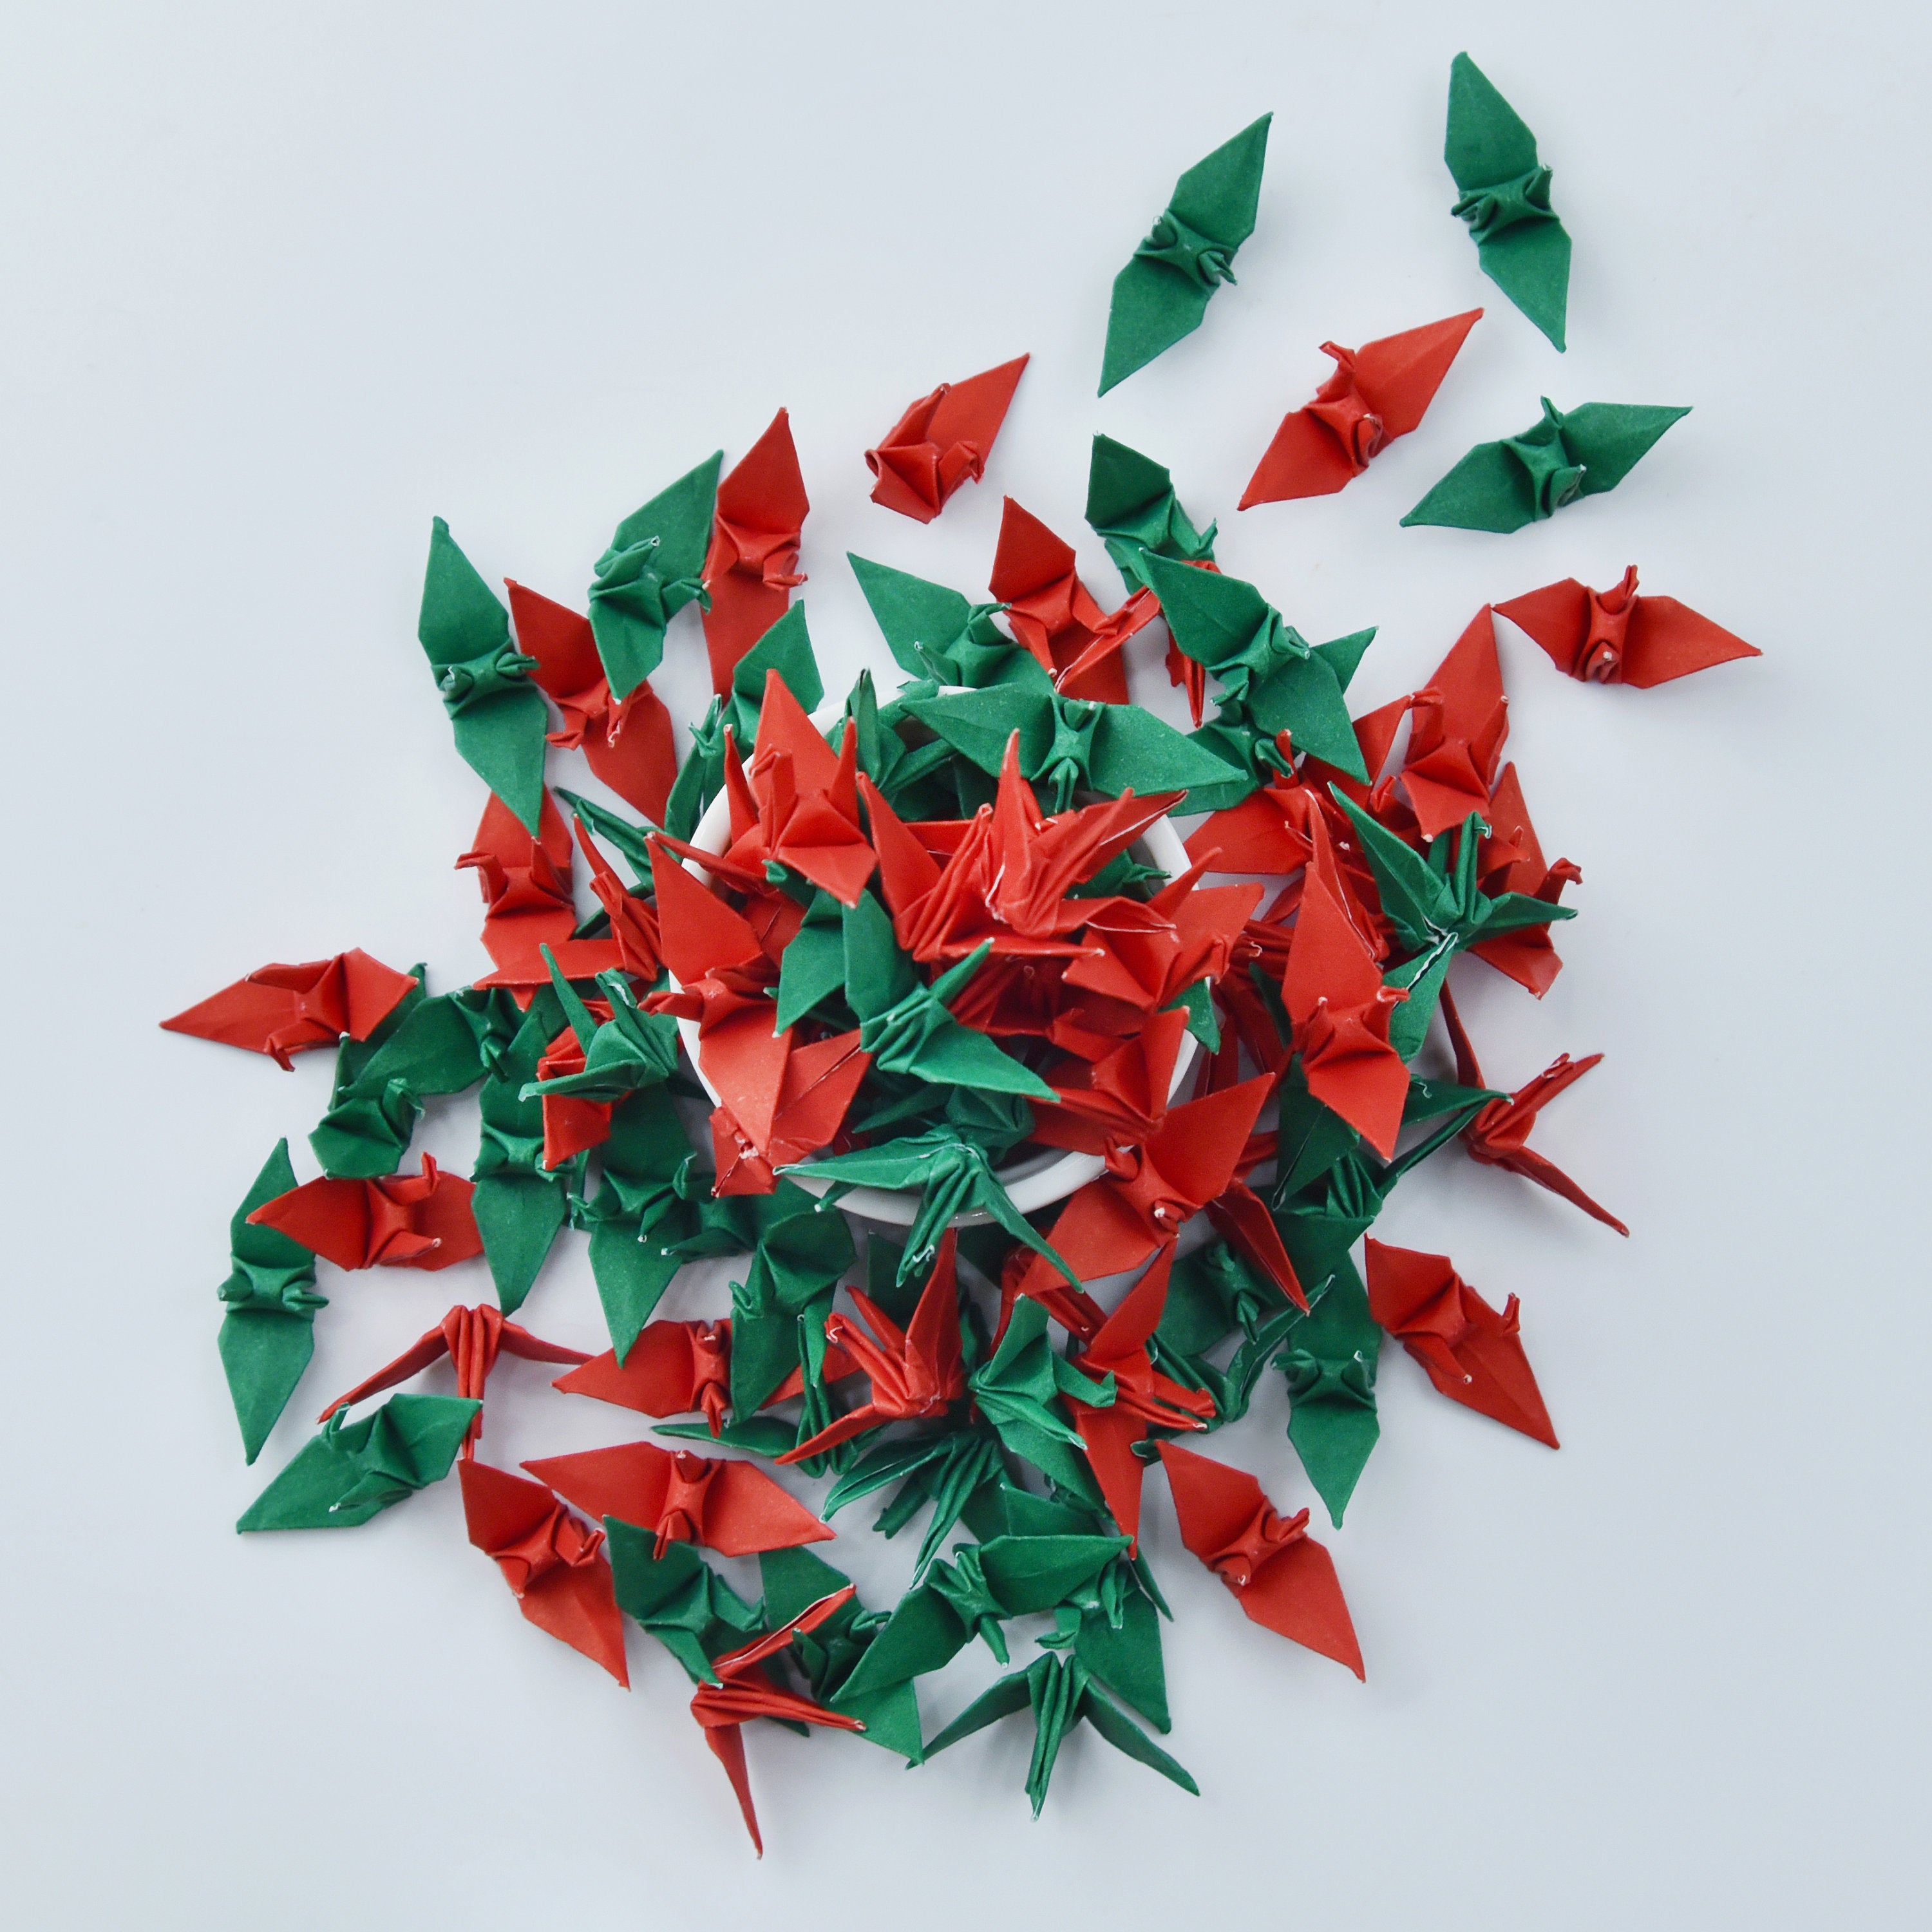 1000 Christmas Origami Paper Cranes 3.81cm (1.5 inches)